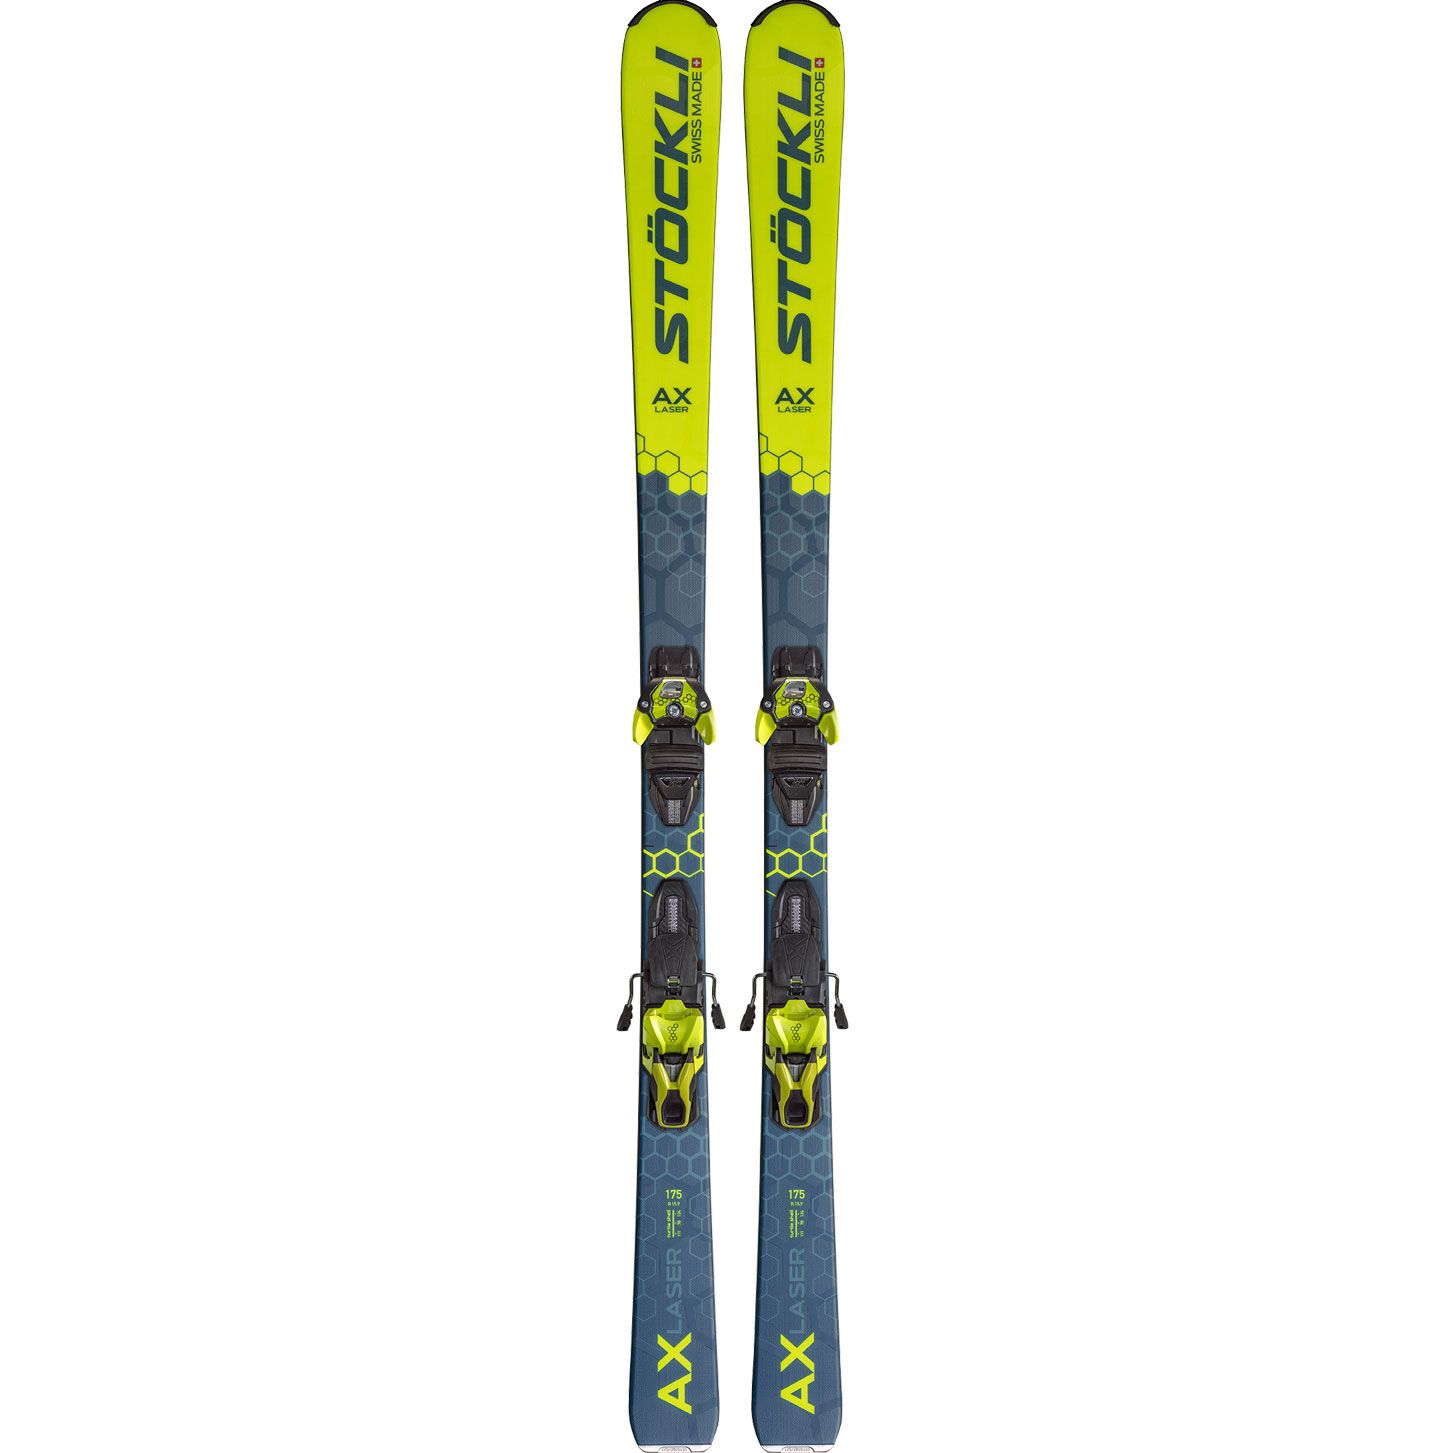 Pack skis Laser AX 2022 + Fixations Xm 13 